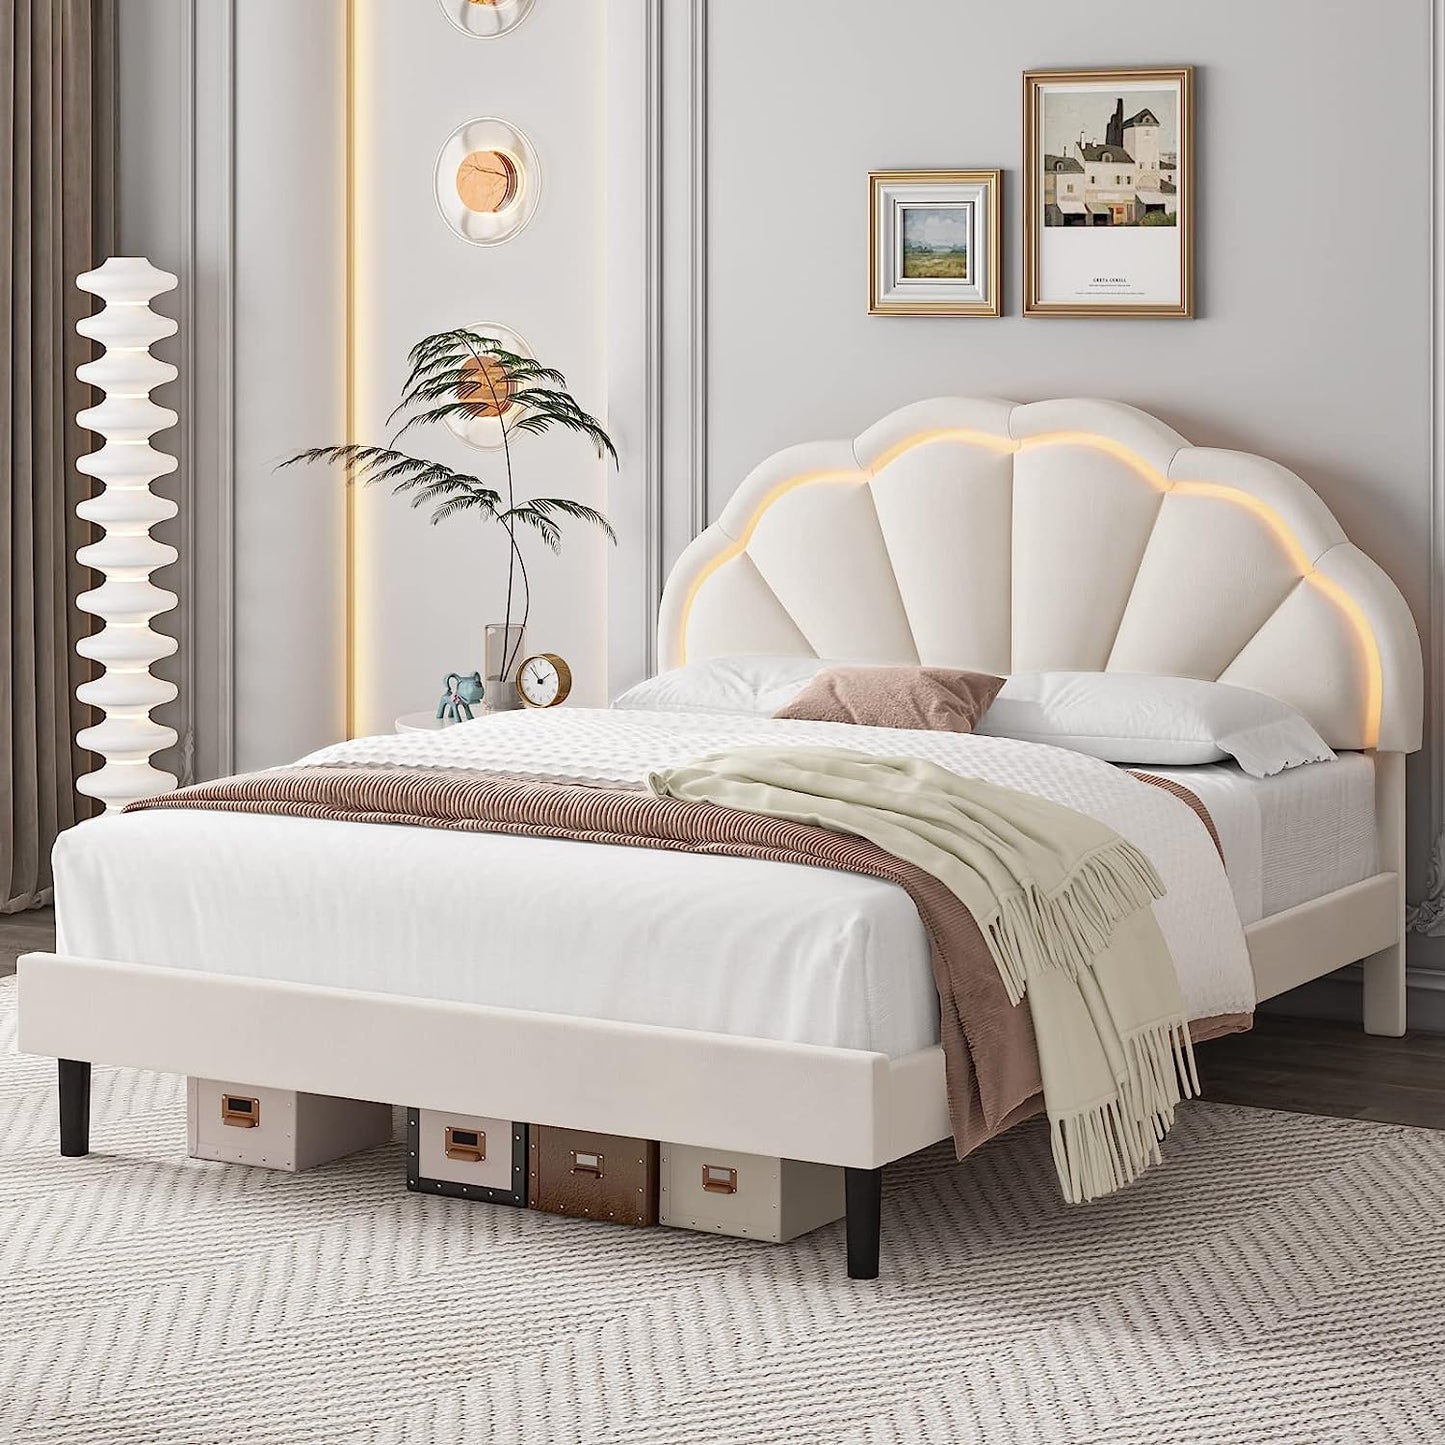 HIFIT Queen Upholstered Smart LED Bed Frame with Adjustable Elegant Flowers Headboard, Platform Bed Frame Queen Size with Wooden Slats Support, No Box Spring Needed, Easy Assembly, Beige